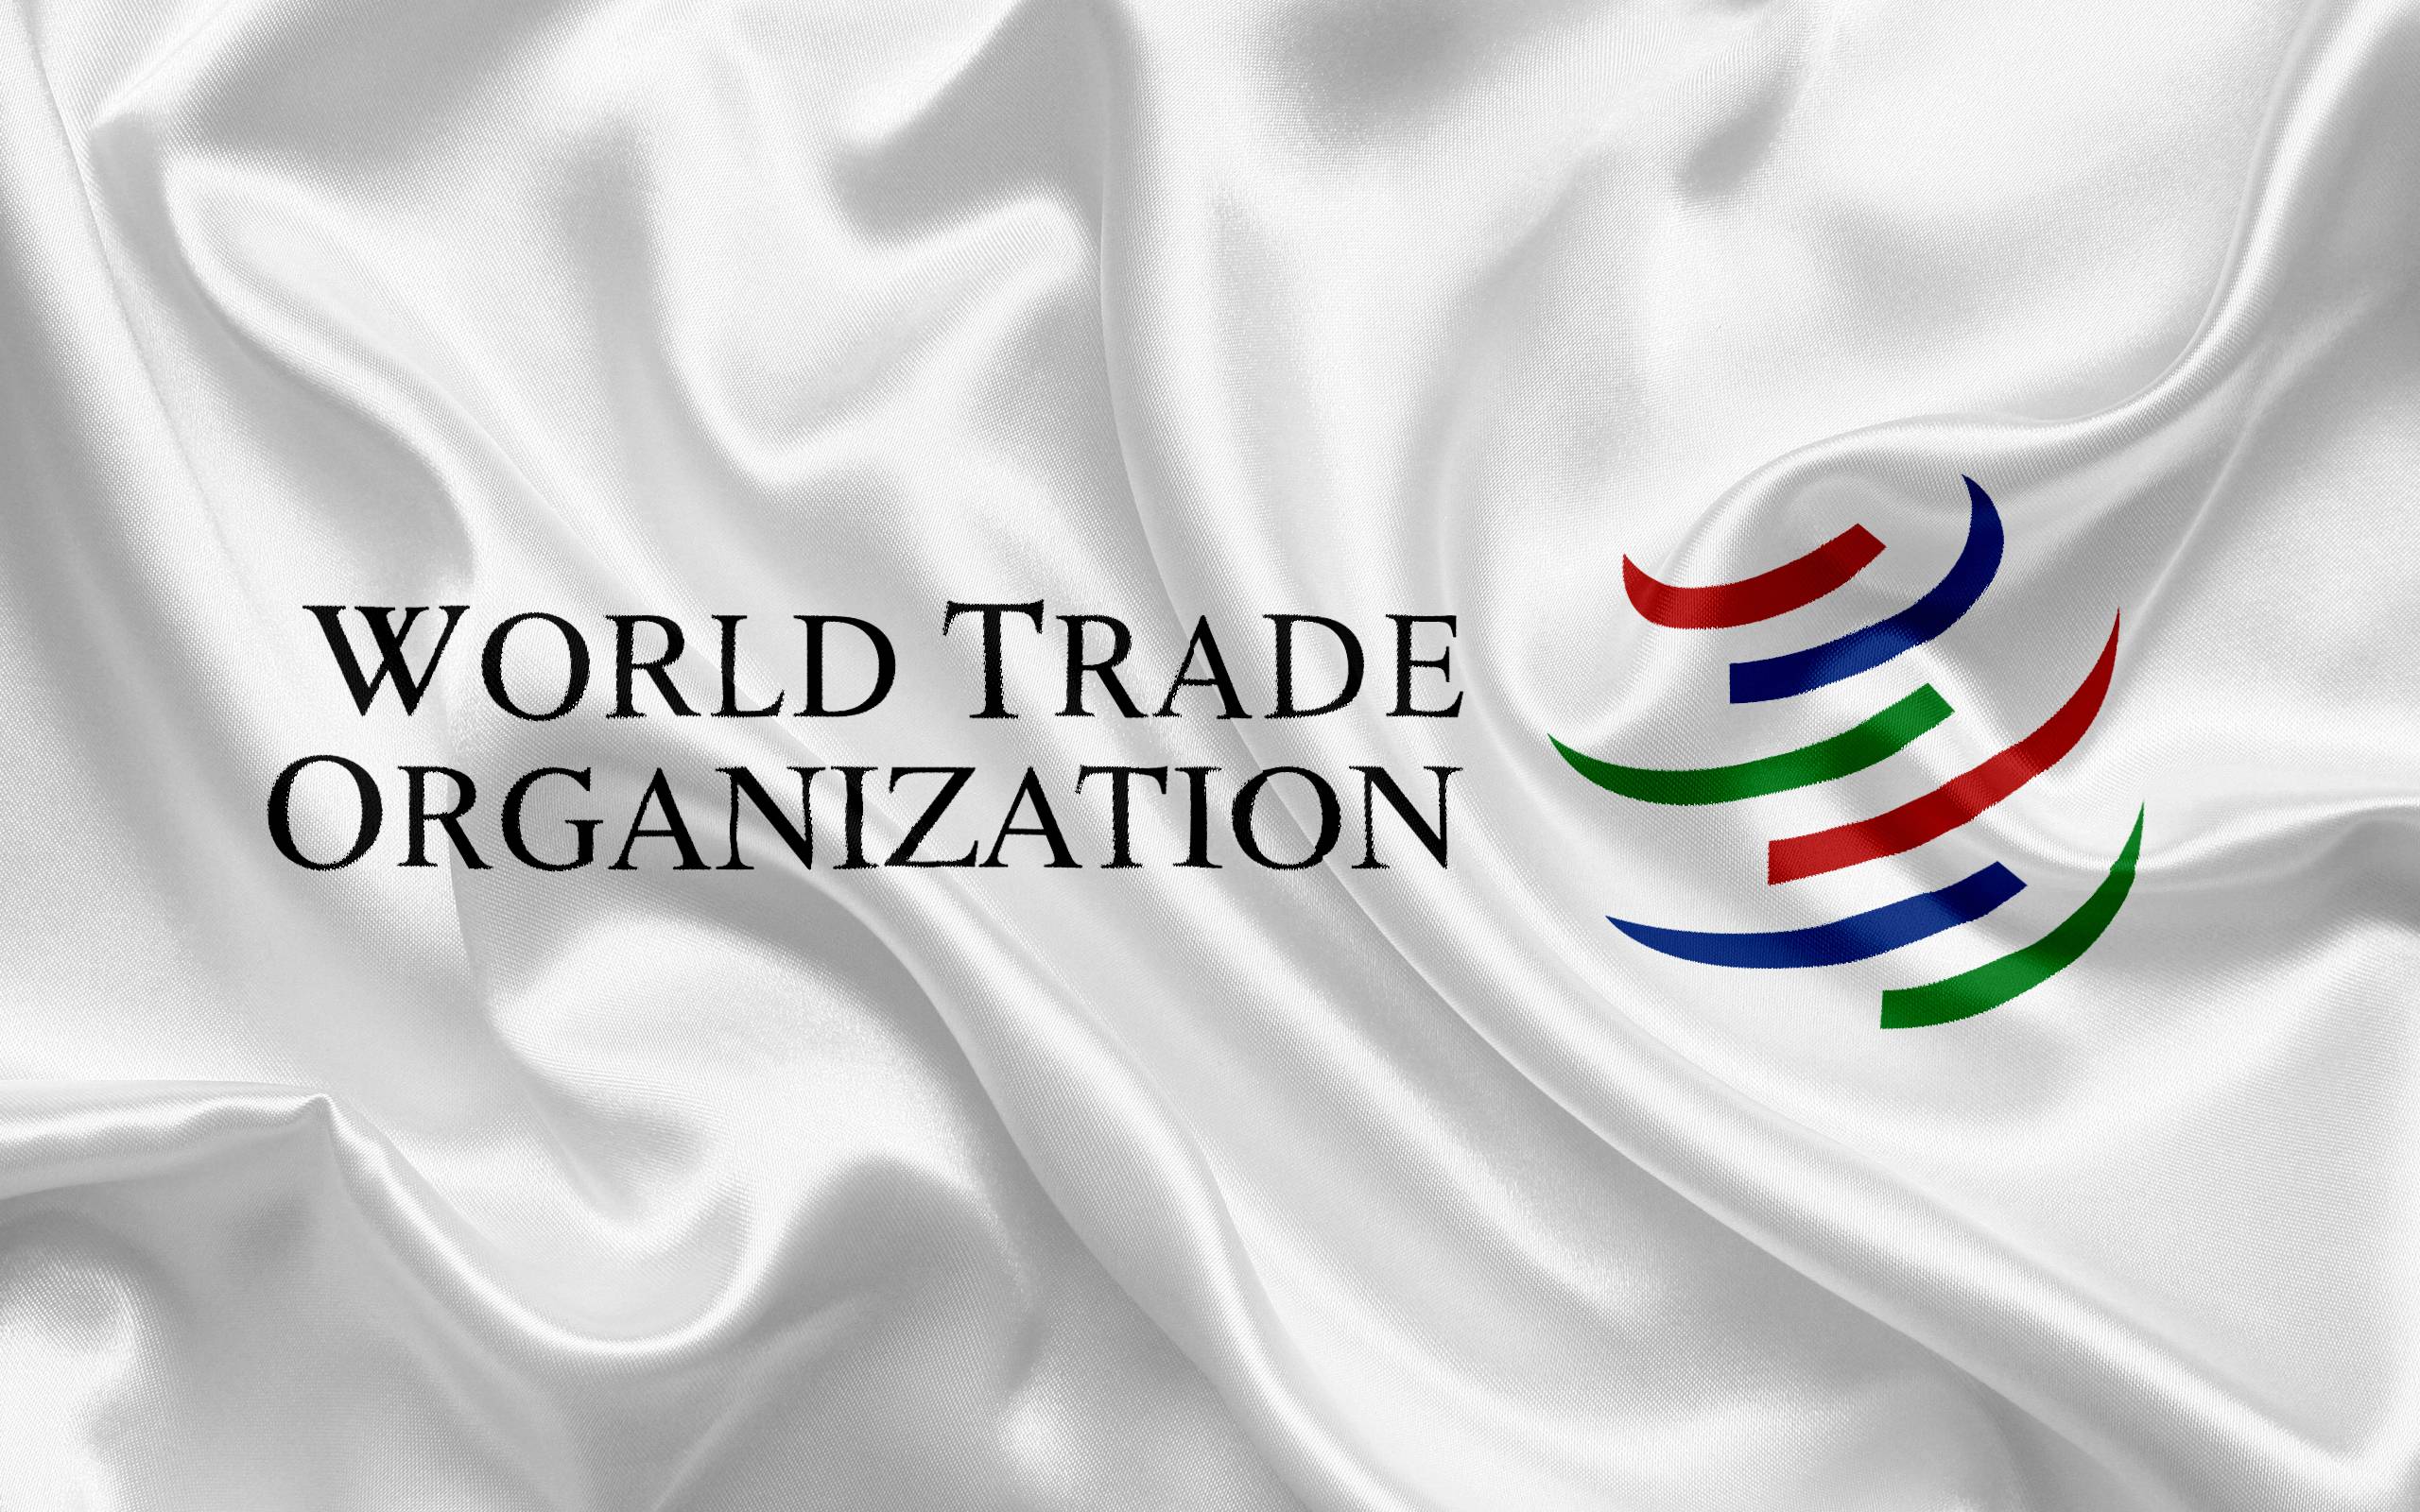 WTO Logo - APEC countries agreed to help improve World Trade Organization ...